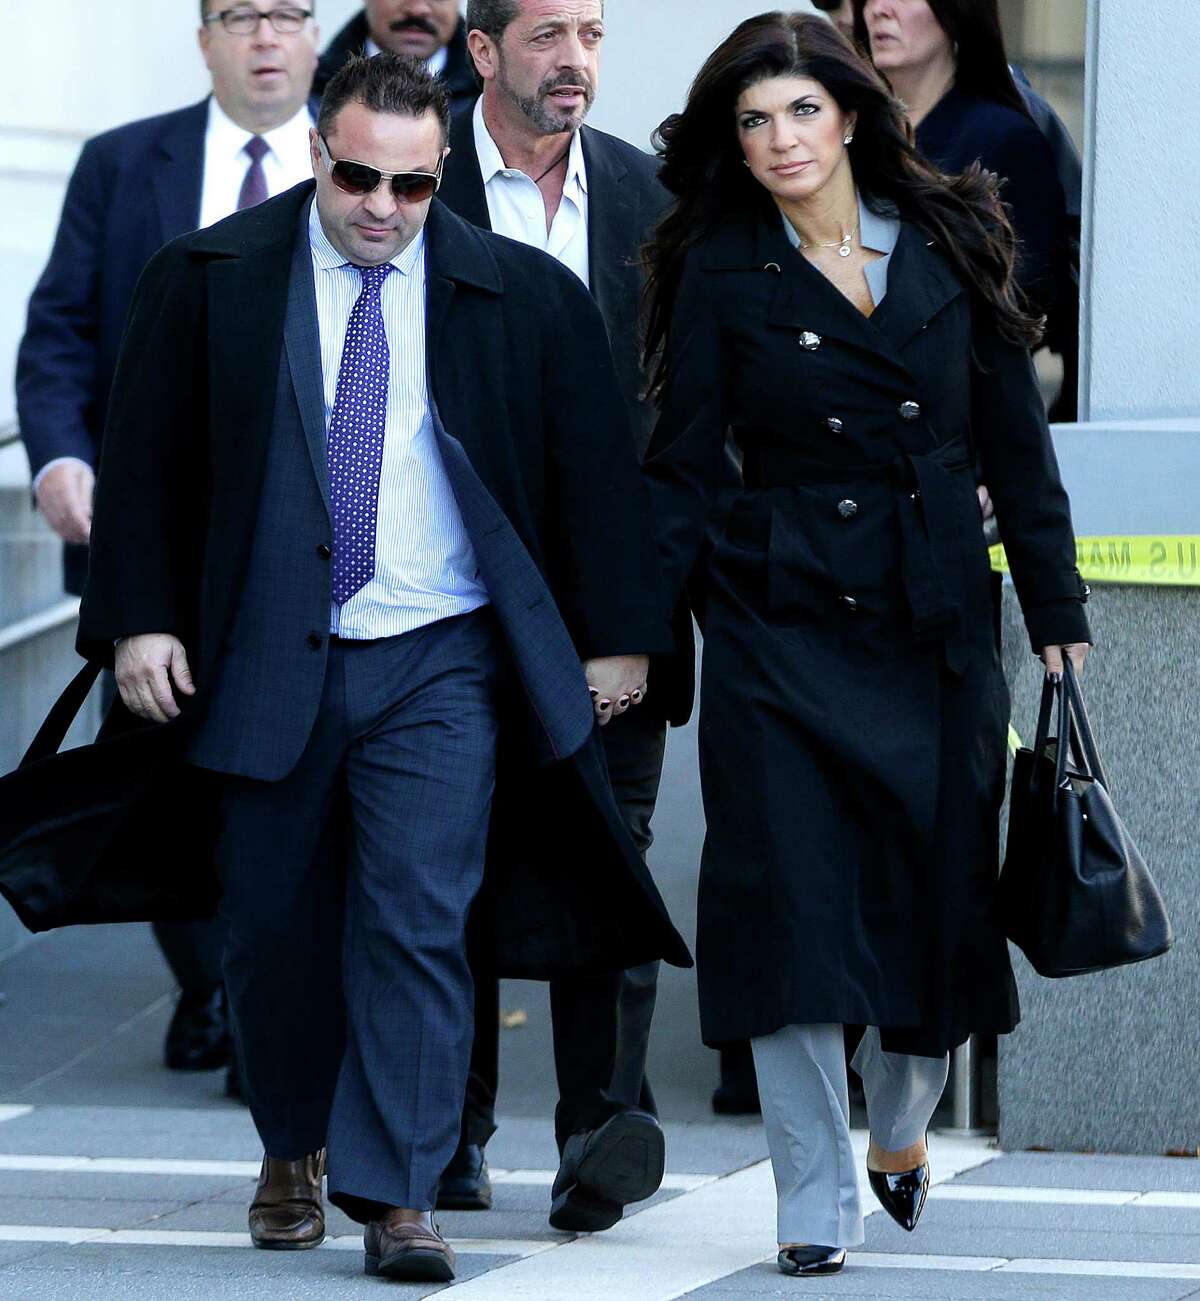 Giuseppe "Joe" Giudice, 43, left, and his wife, Teresa Giudice, 41, of Montville Township, N.J., walk out of Martin Luther King, Jr. Courthouse after a court appearance Nov. 20, 2013, in Newark, N.J.